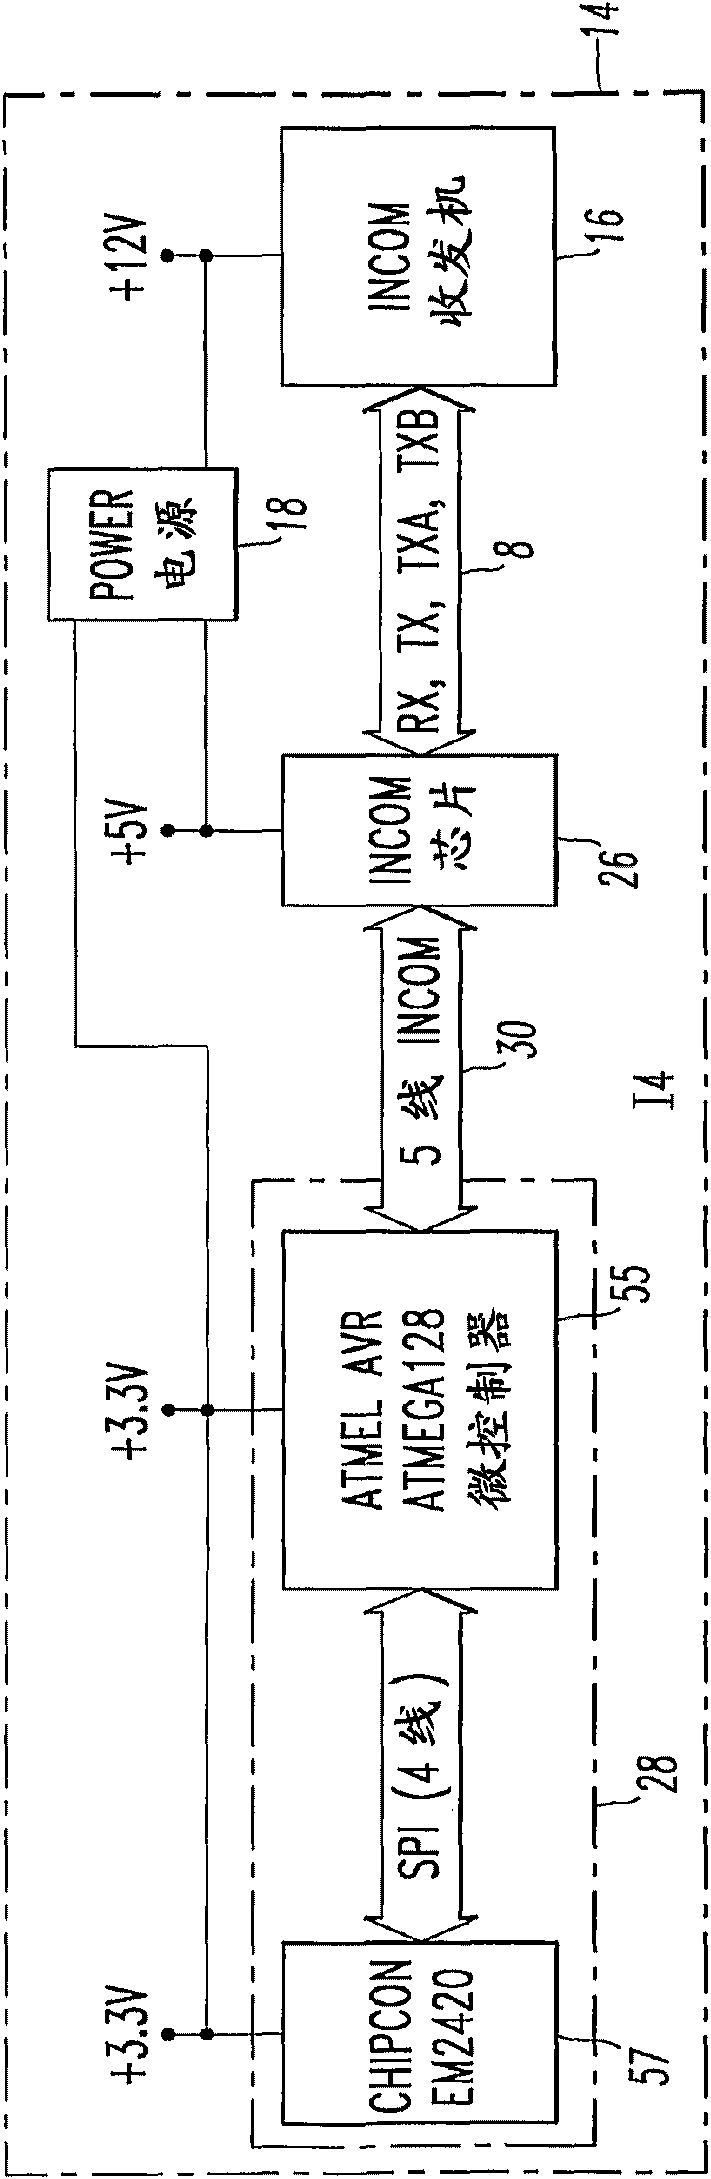 Wireless communication network and wireless control or monitoring device employing an XML schema